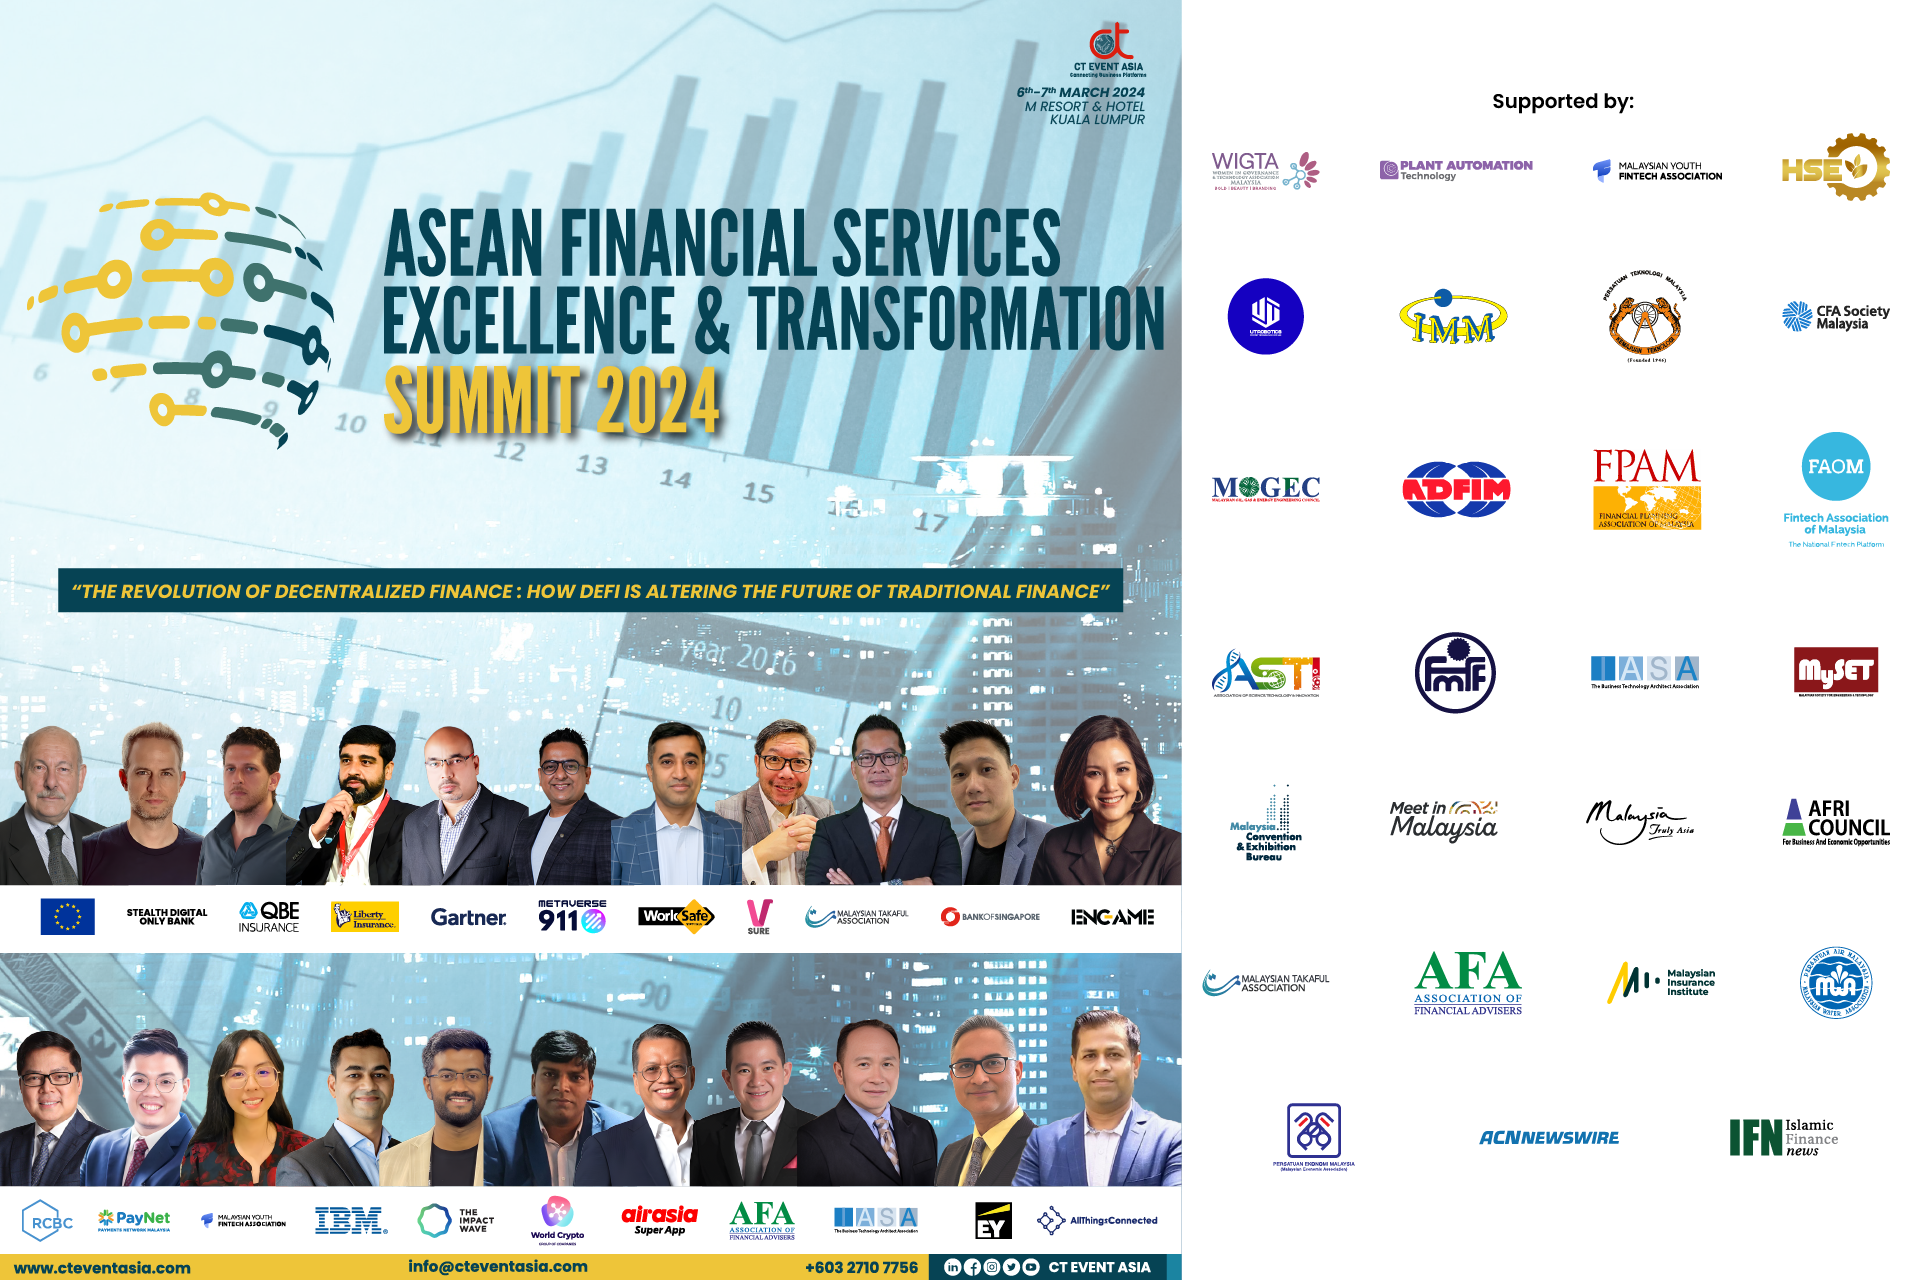 Traditional Finance Faces Revolution as Decentralized Finance Takes Center Stage at ASEAN Summit